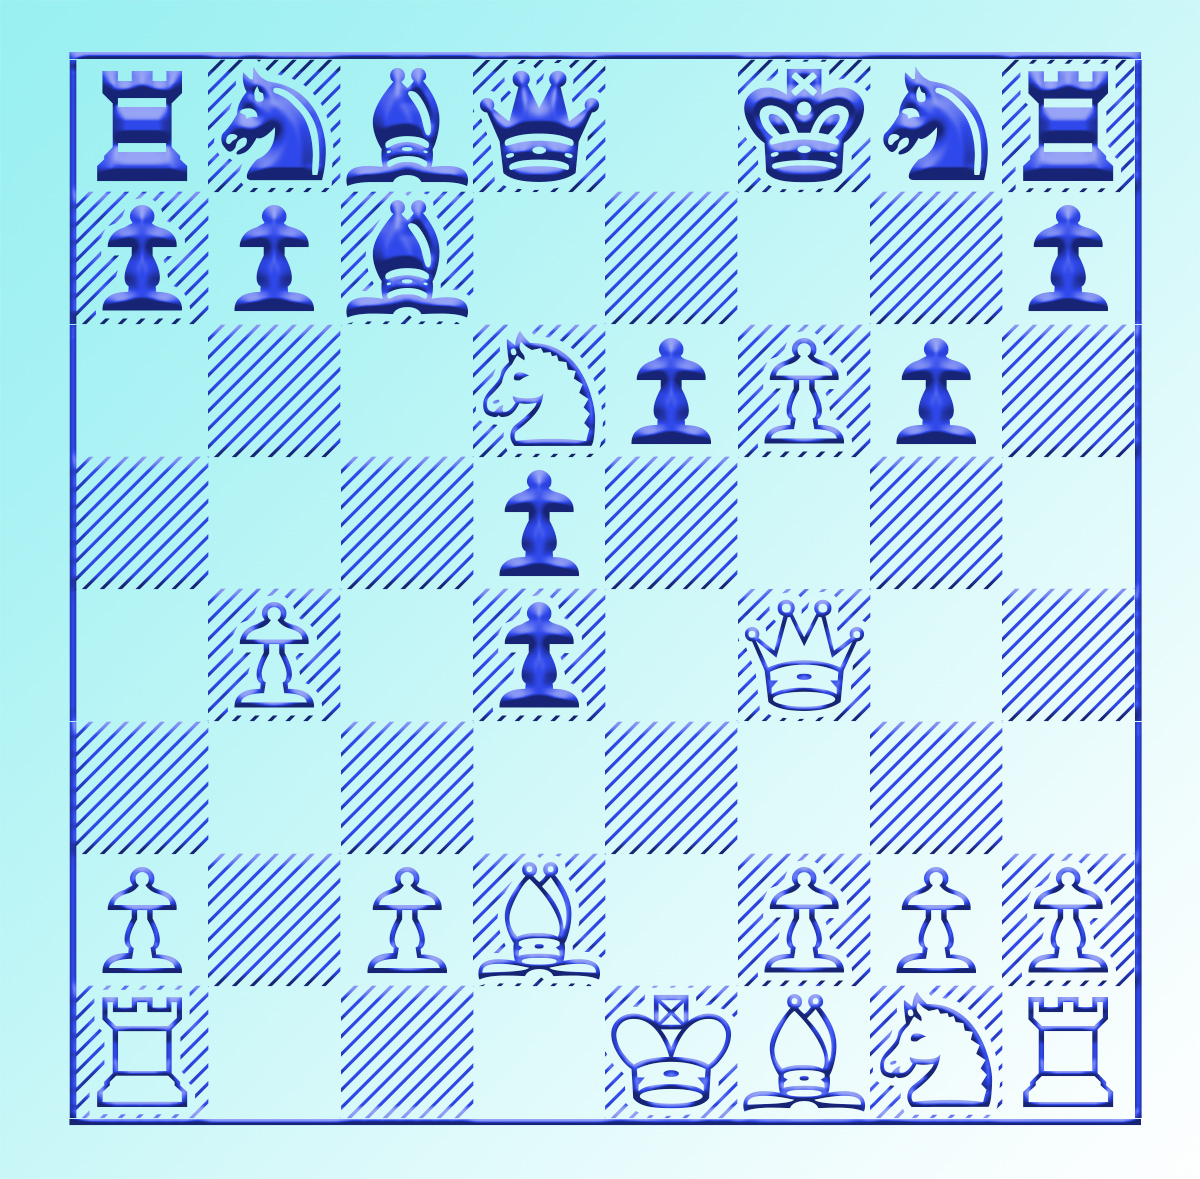 learning - Where can I find free training tools like detailed annotated chess  openings, middle games and endgames in the PGN format? - Chess Stack  Exchange